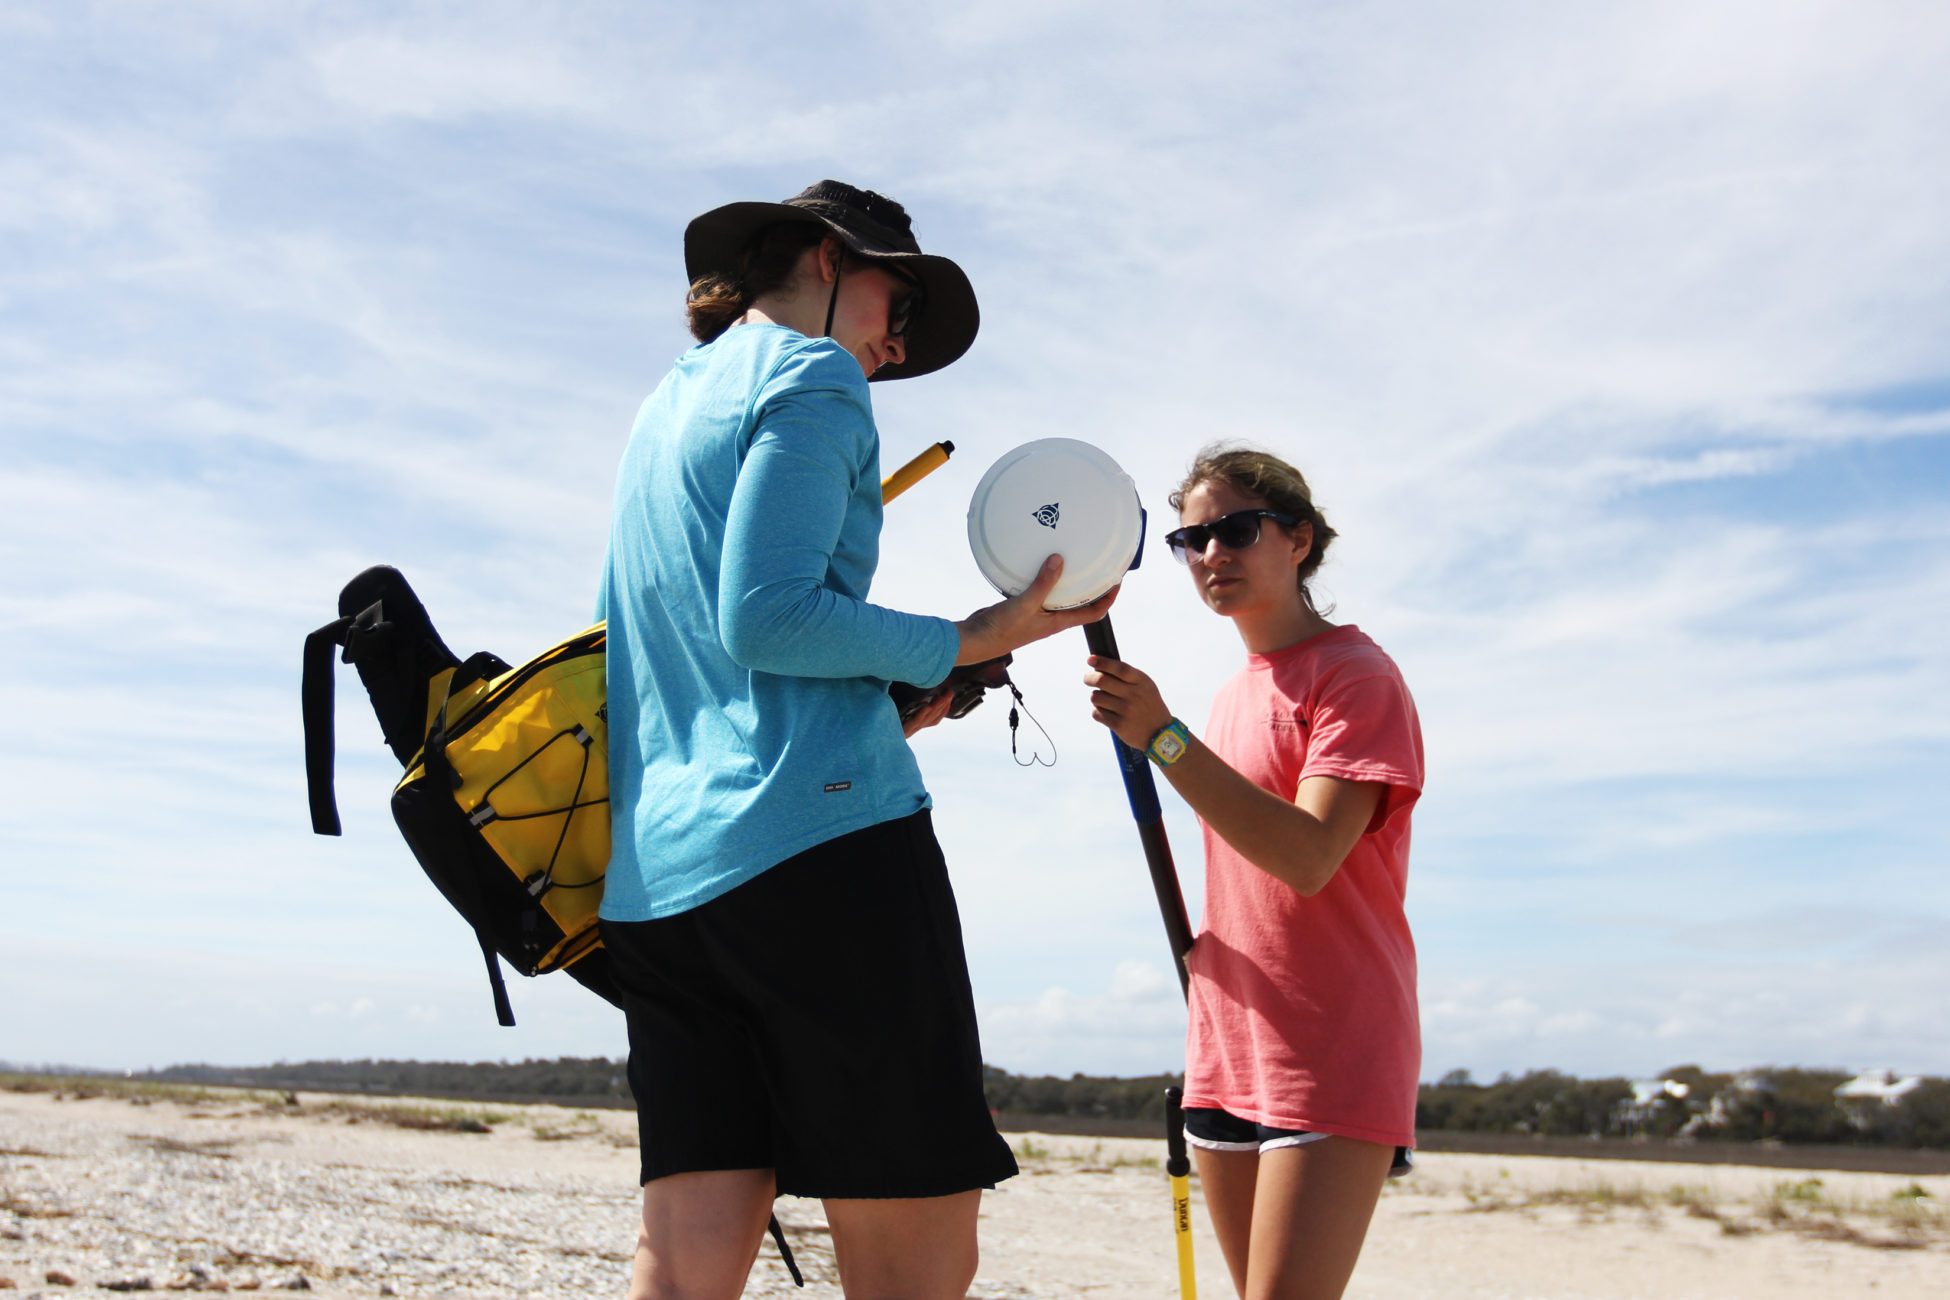 Elsemarie deVries and Atencio attach the GPS to a pole